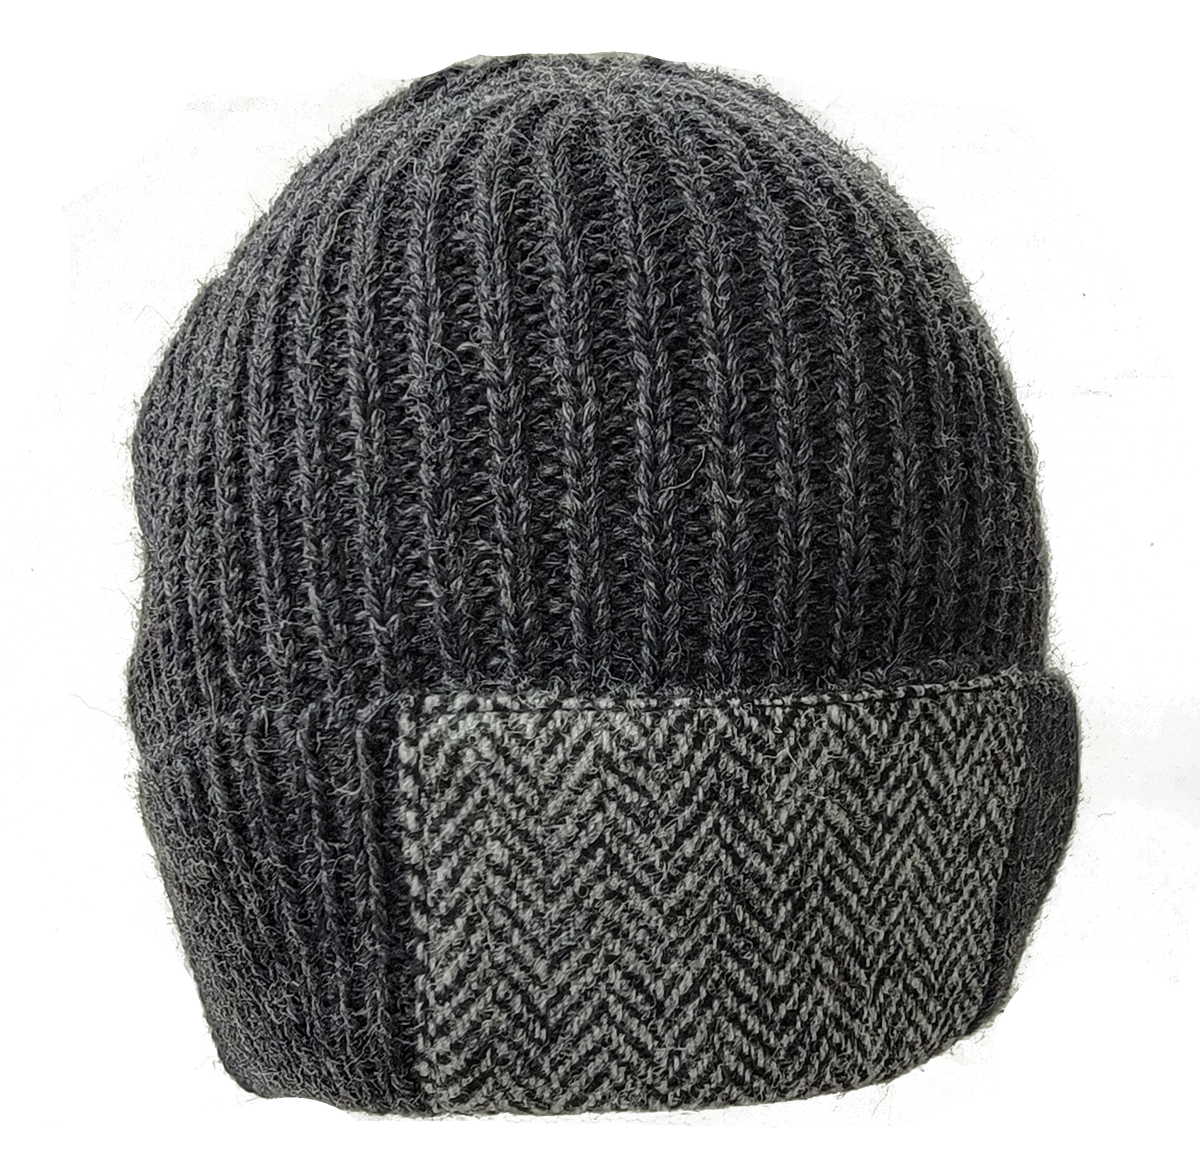 Woolly Pully Beanie Hats with Patch - TW Kempton Kilmory Wool Cap